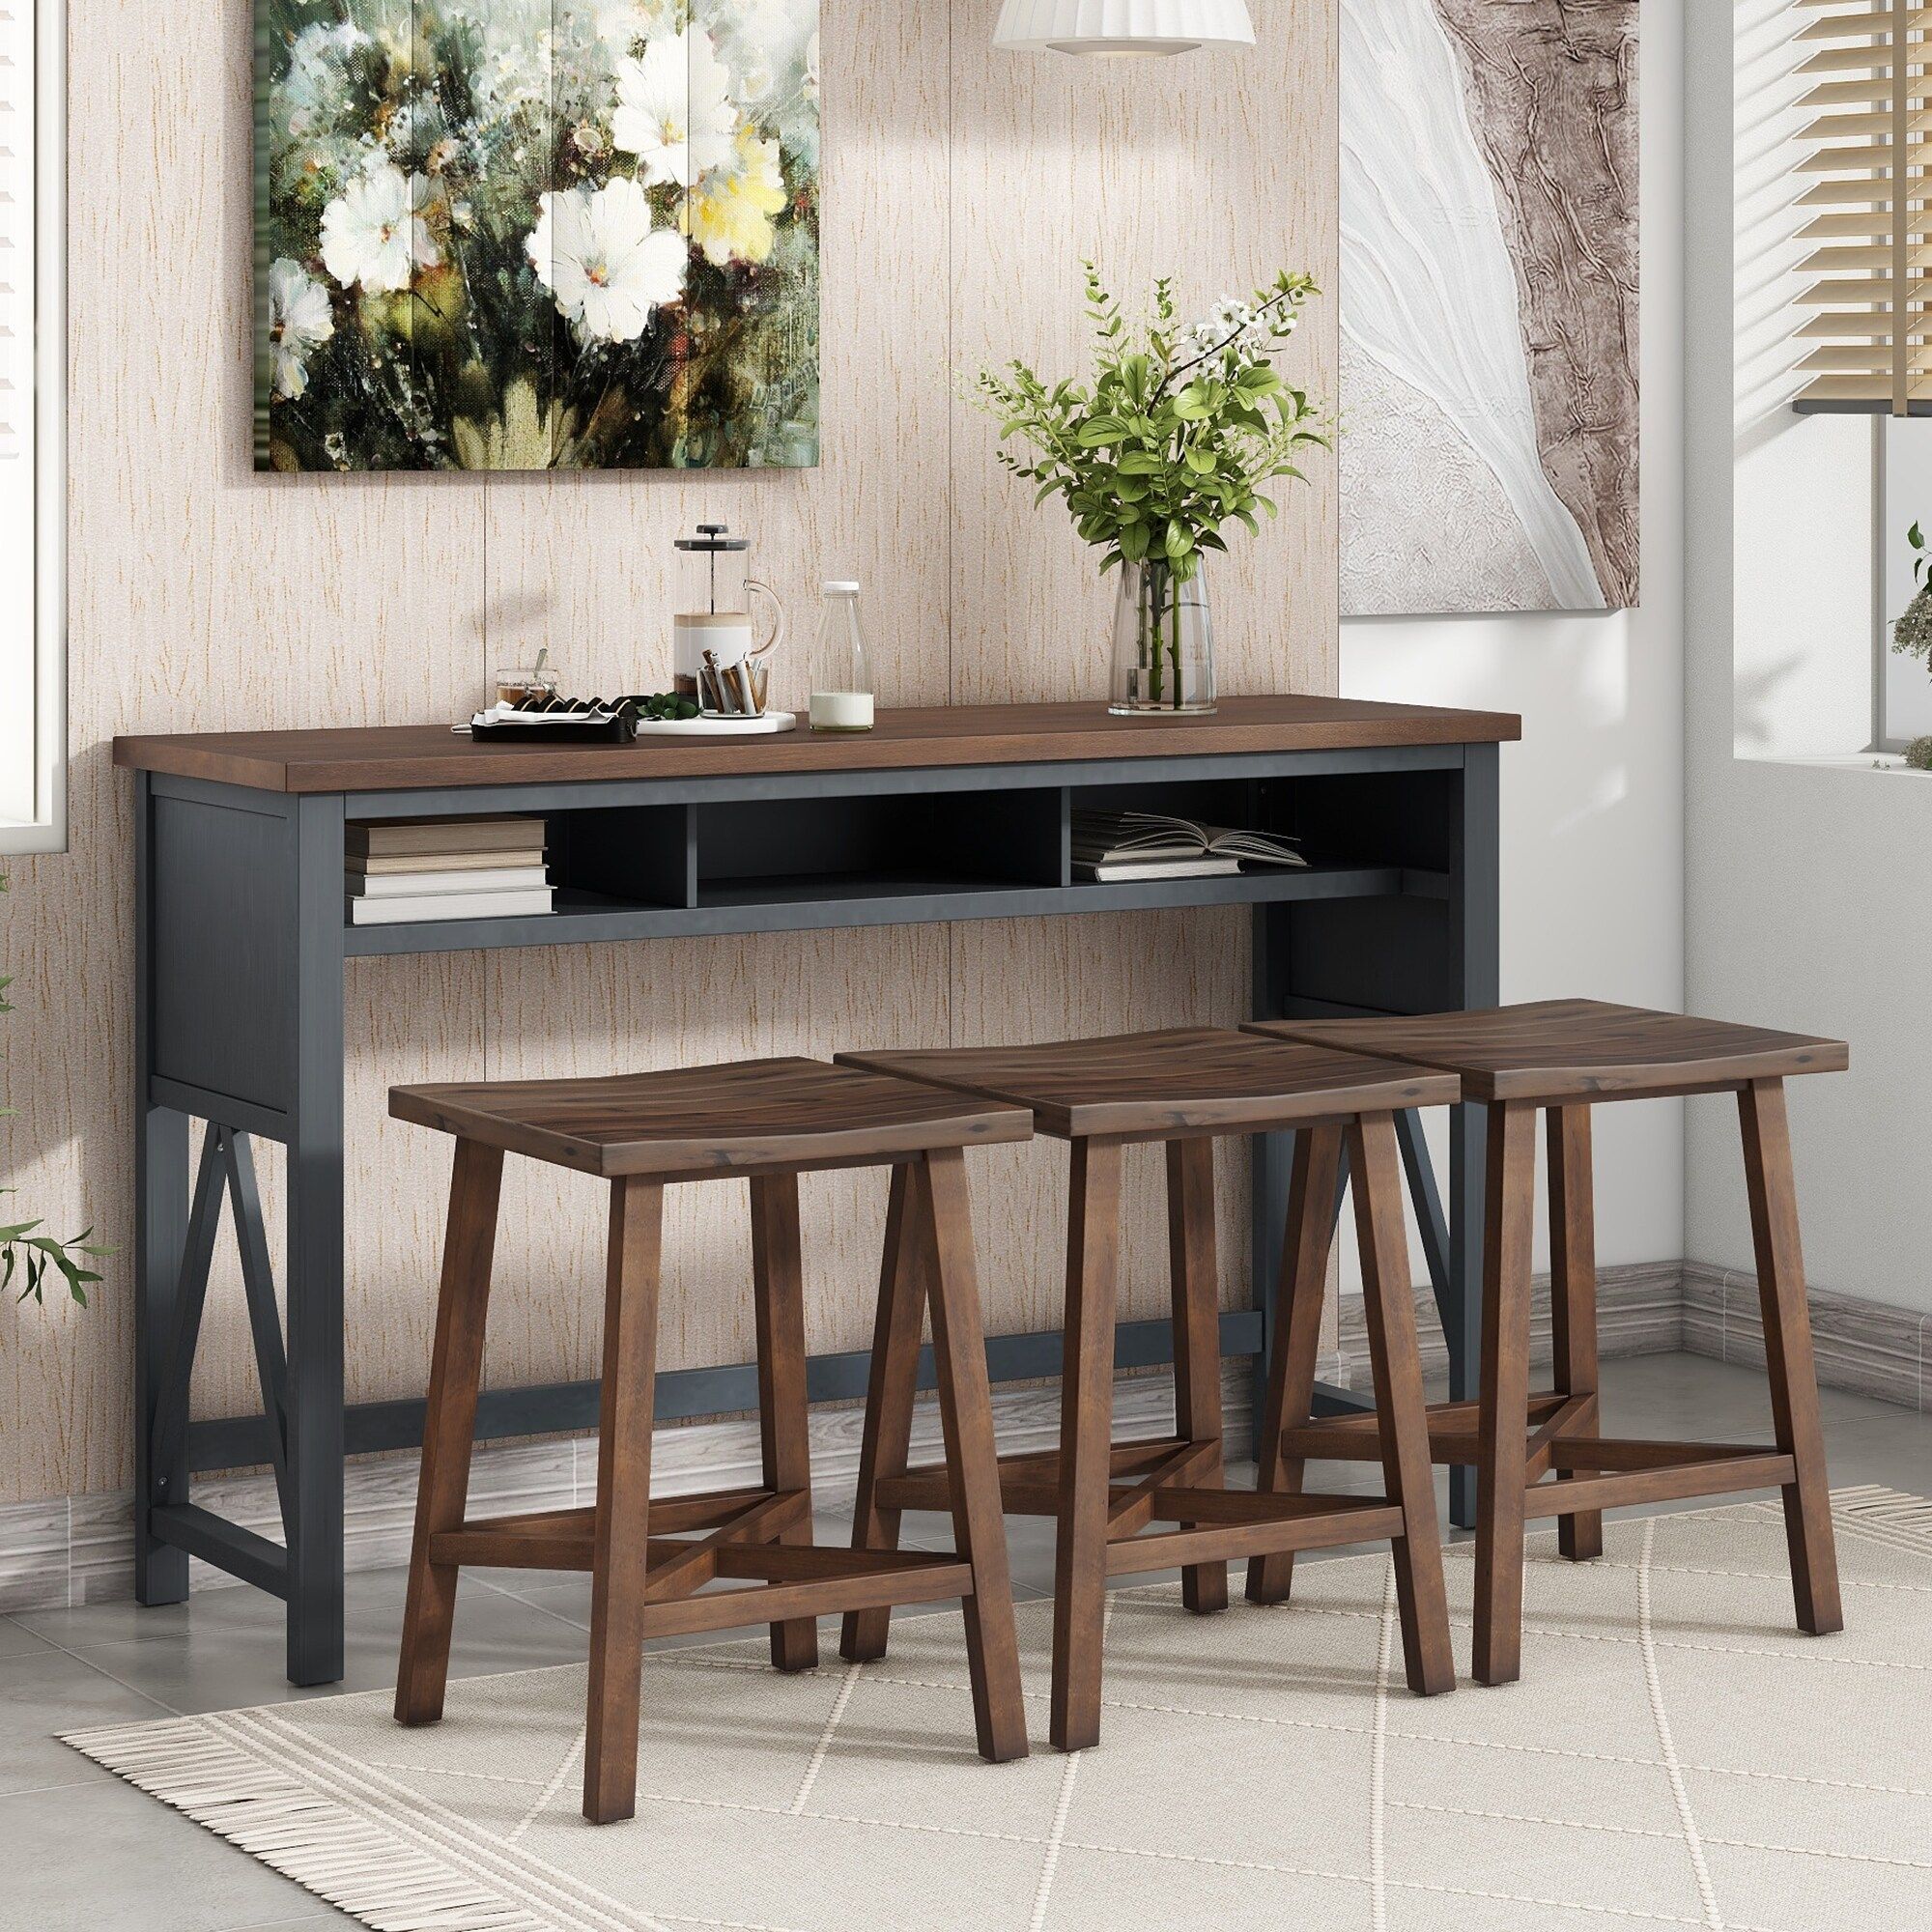 Elevated Storage Solutions: The Versatile Beauty of Counter Height Tables